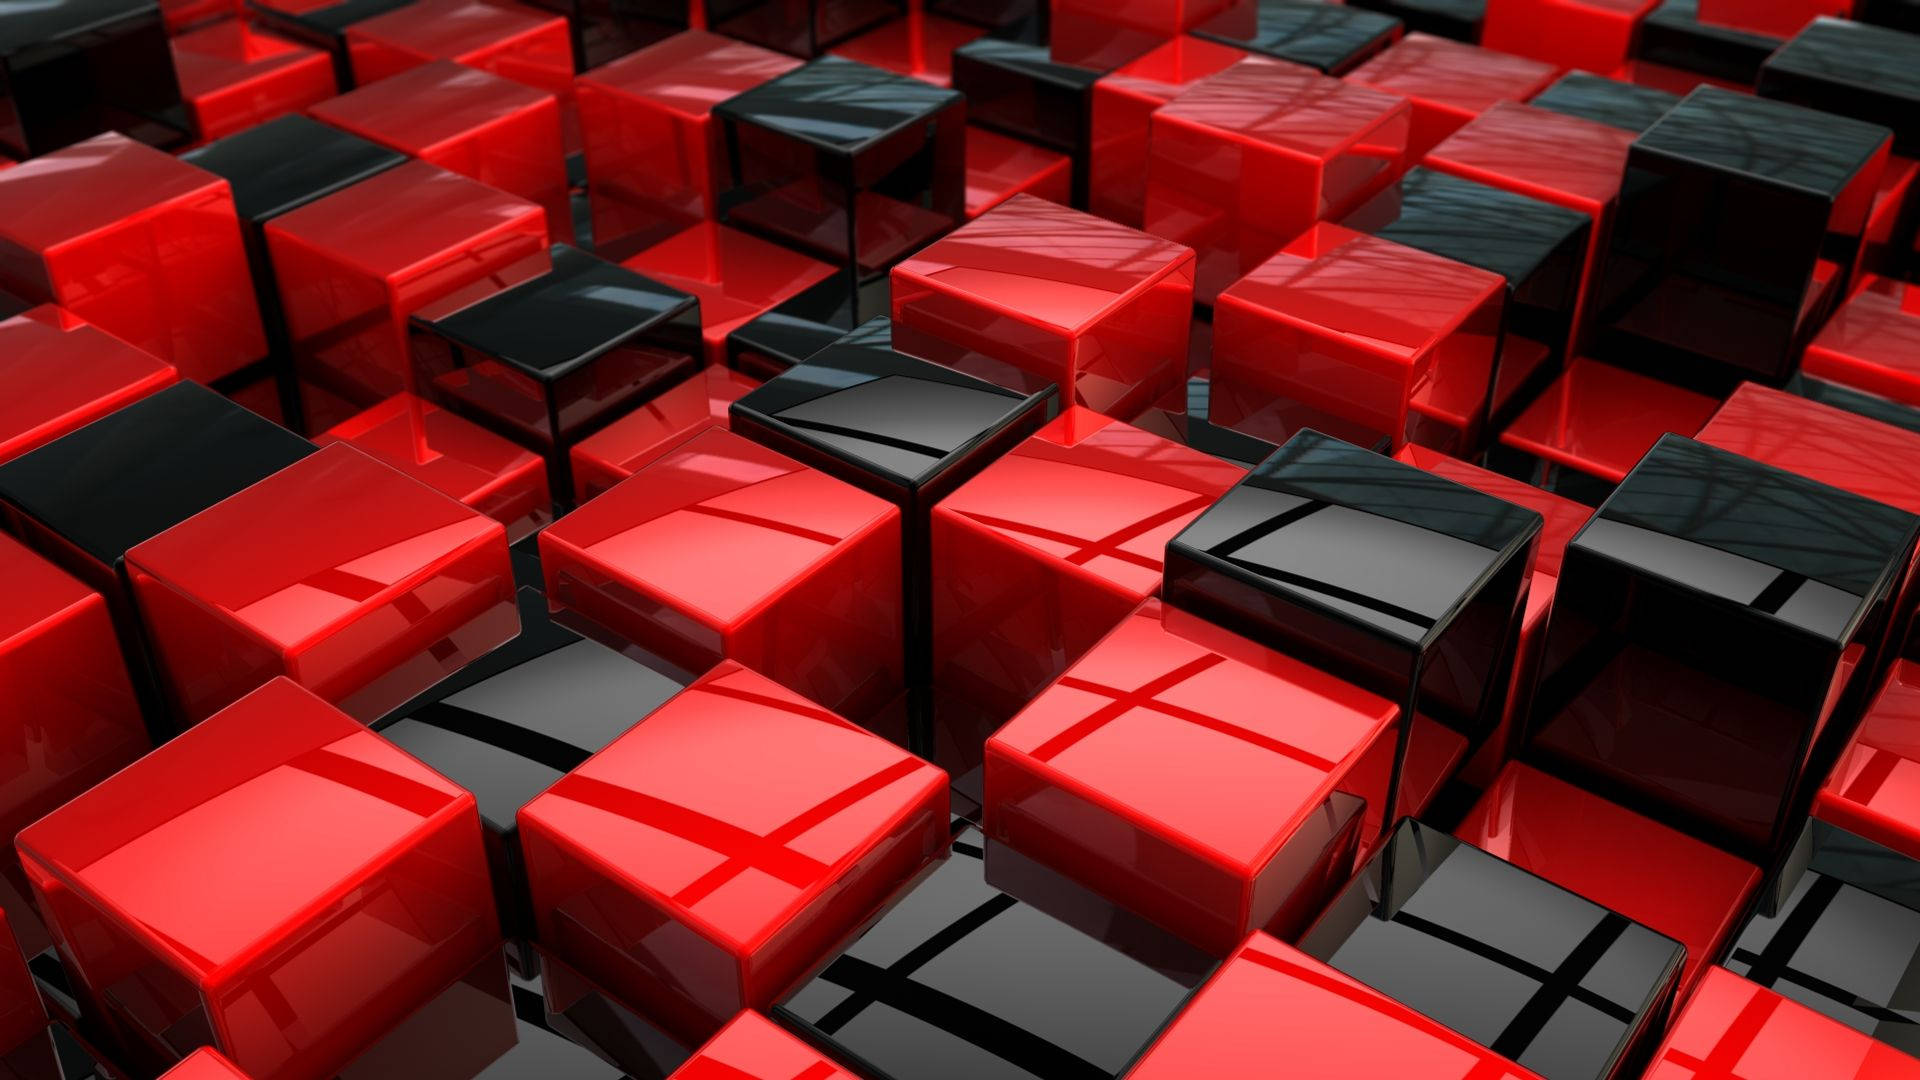 Modular Explosion Of Red And Black Cubes